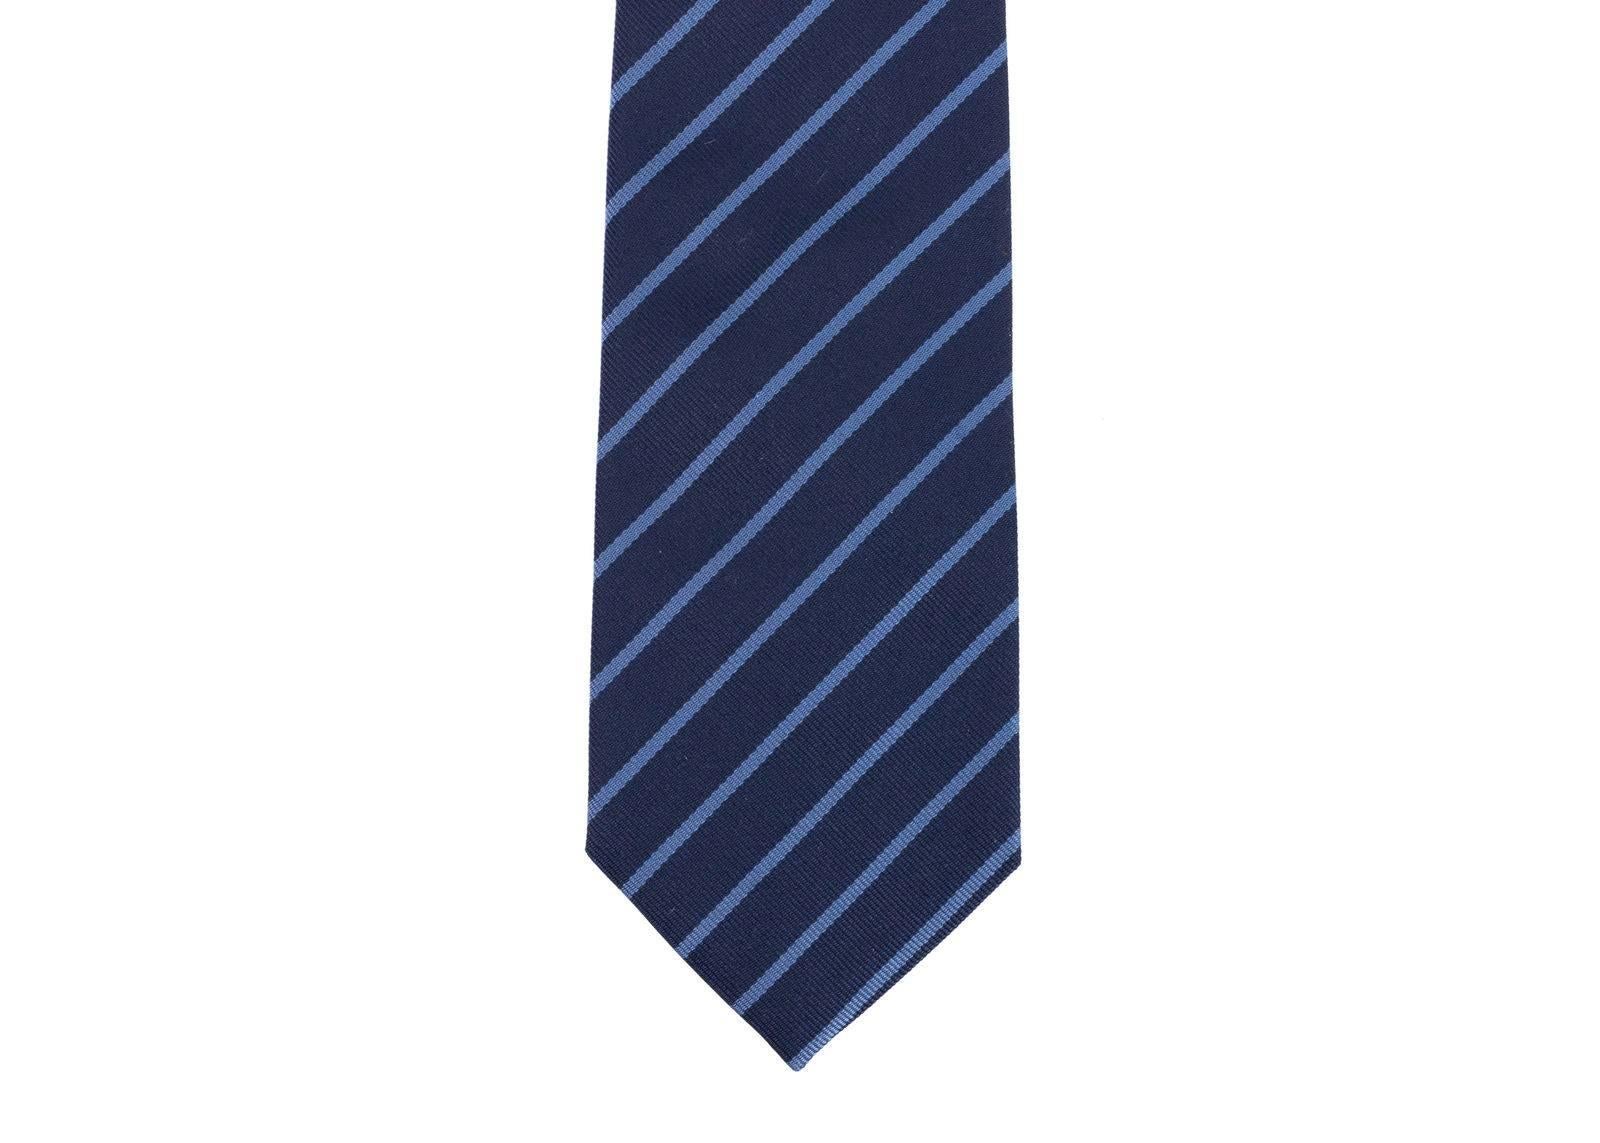 Italian luxury brand, Tom Ford, has crafted these gorgeous Silk Tie for important special occasions and professional events. The tie is great to pair with your favorite solid color button down and blazers with your chosen pair or classic trousers.